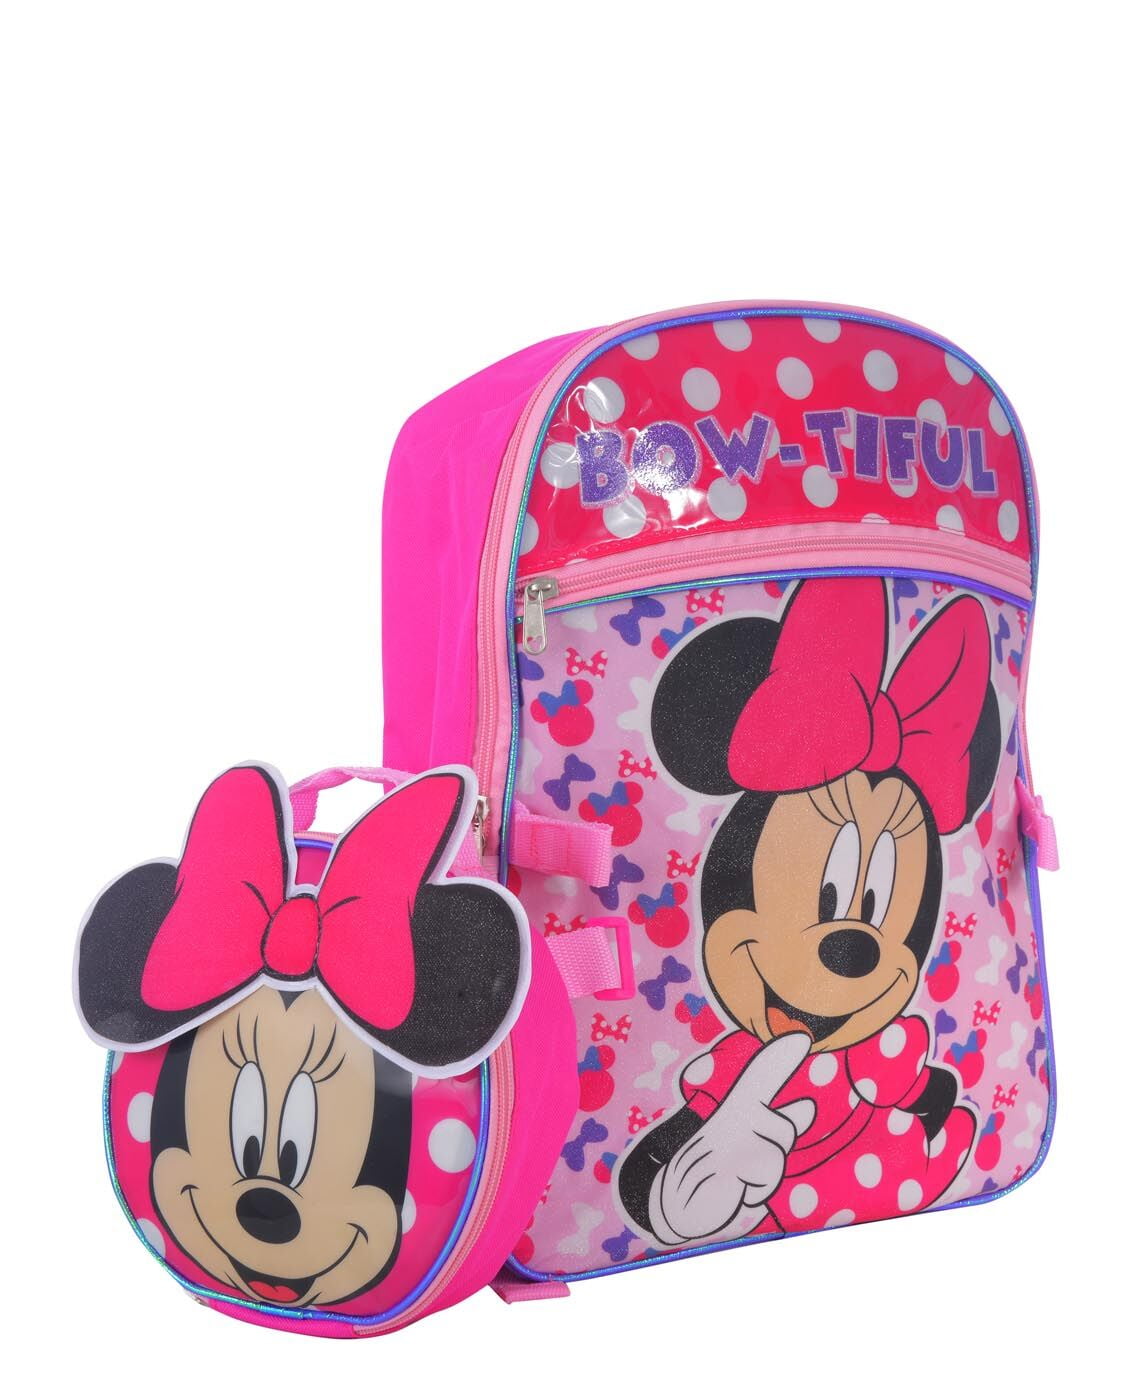 Disney Minnie Mouse 16" Backpack W/Bonus Matching Insulated Lunch Box Set NWT 